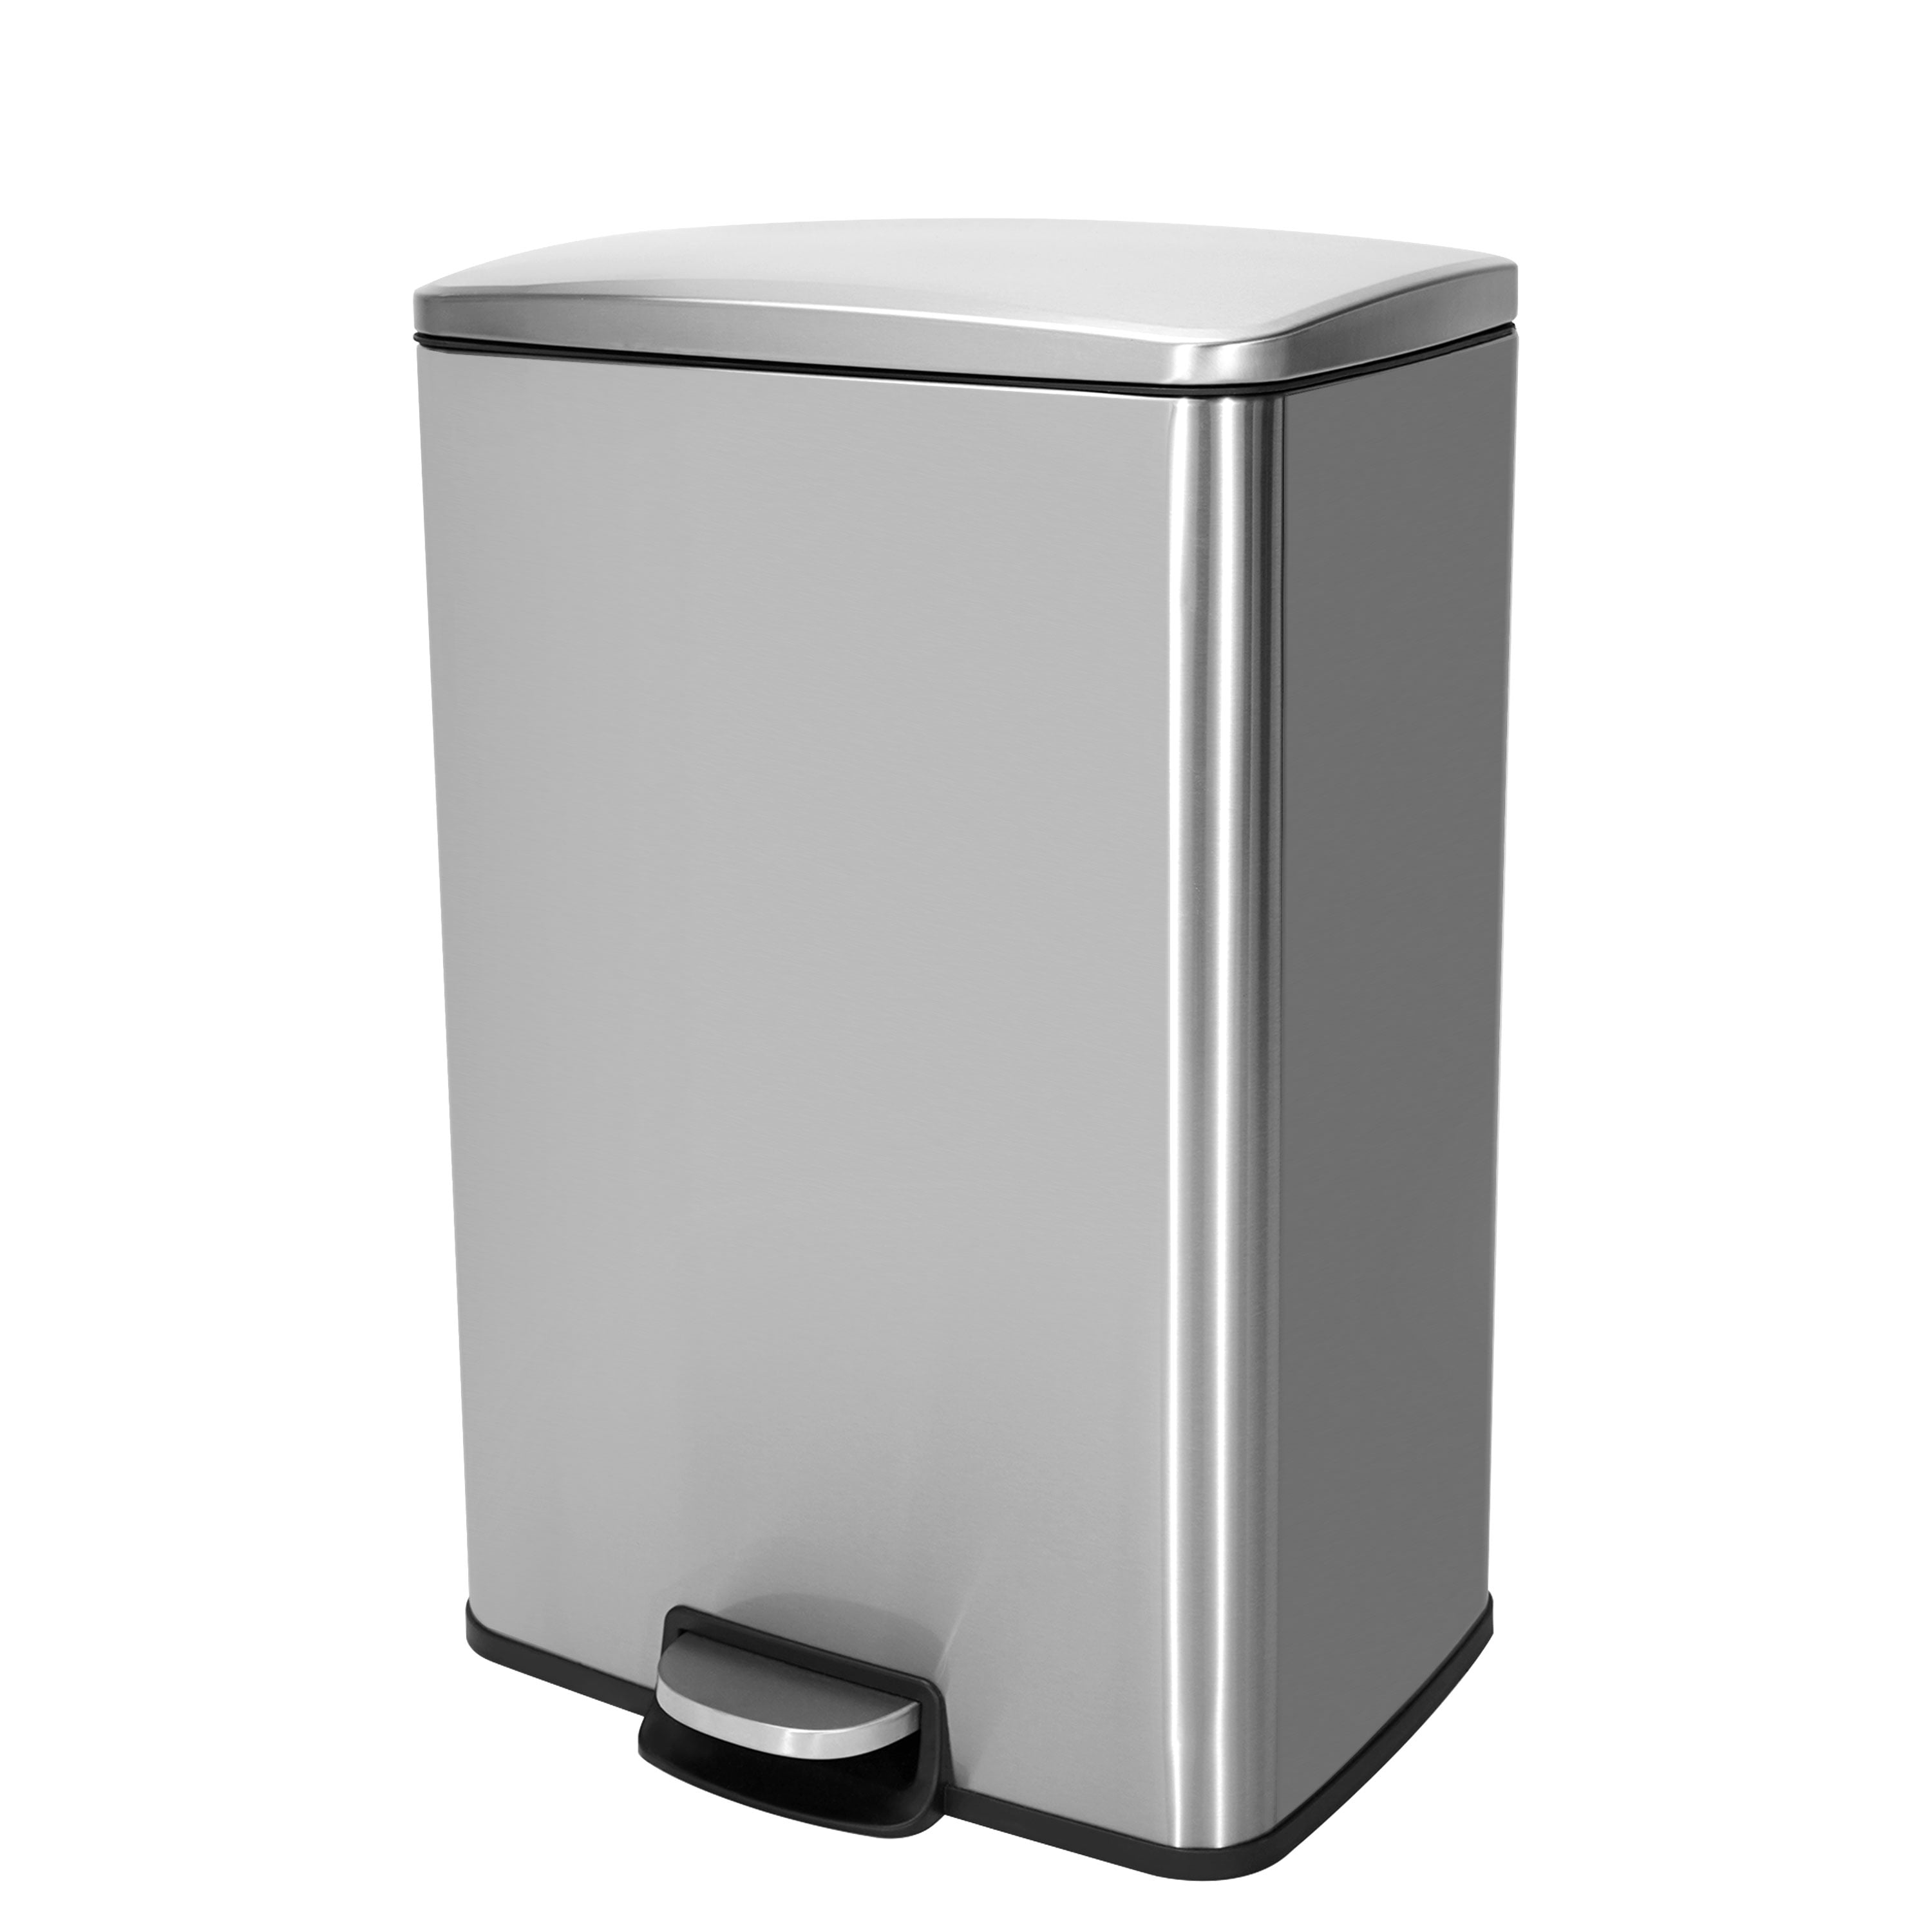 Innovaze 13 Gallon Stainless Steel Step Rectangular Kitchen Trash Can Garbage Cans Walmart Stainless Steel